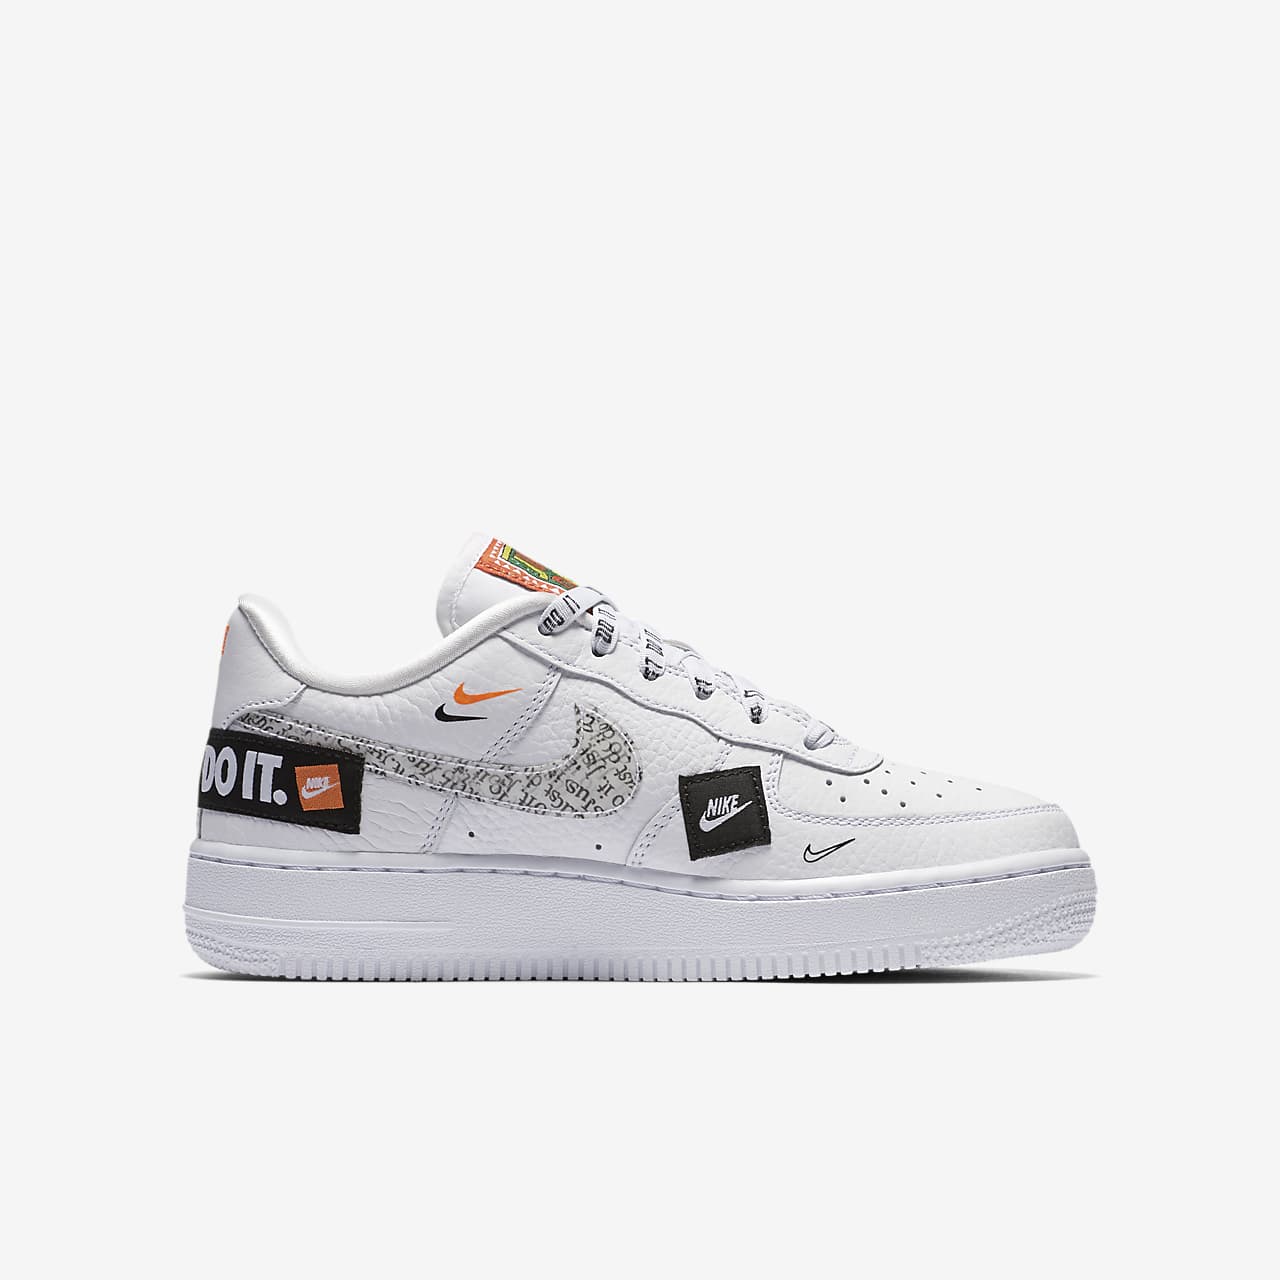 nike air force 1 low premium just do it